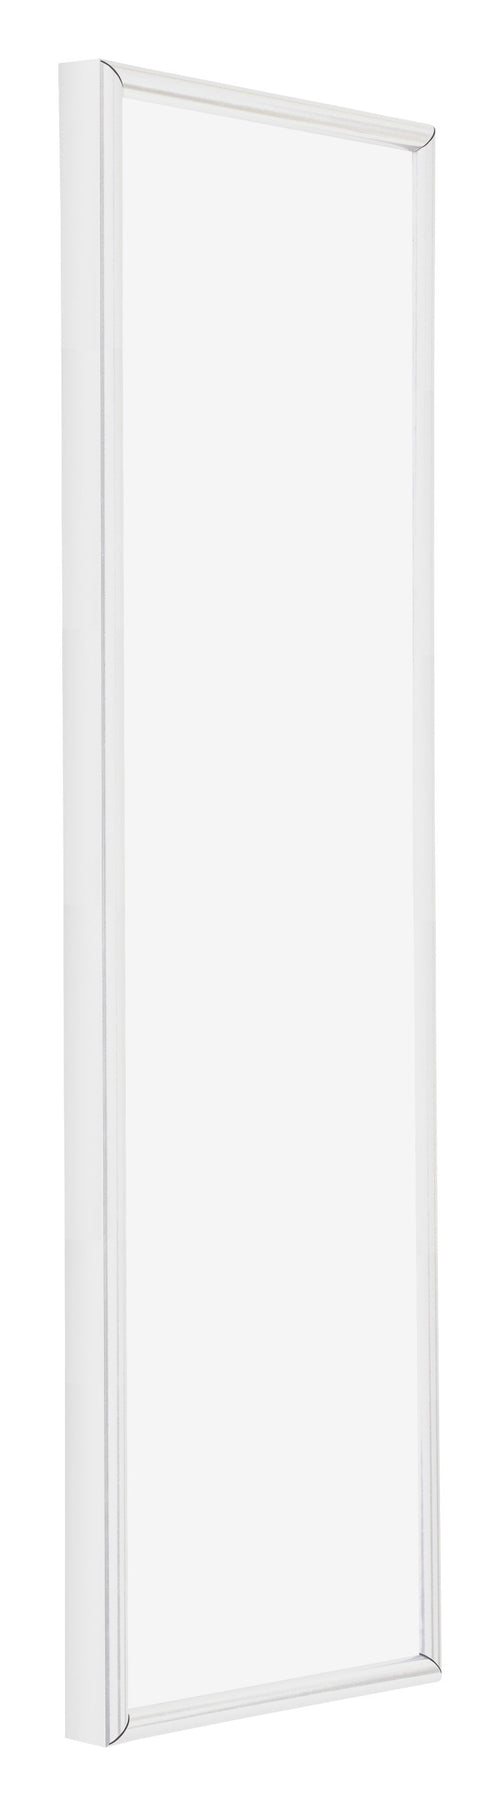 Annecy Plastic Photo Frame 33x98cm White High Gloss Front Oblique | Yourdecoration.co.uk